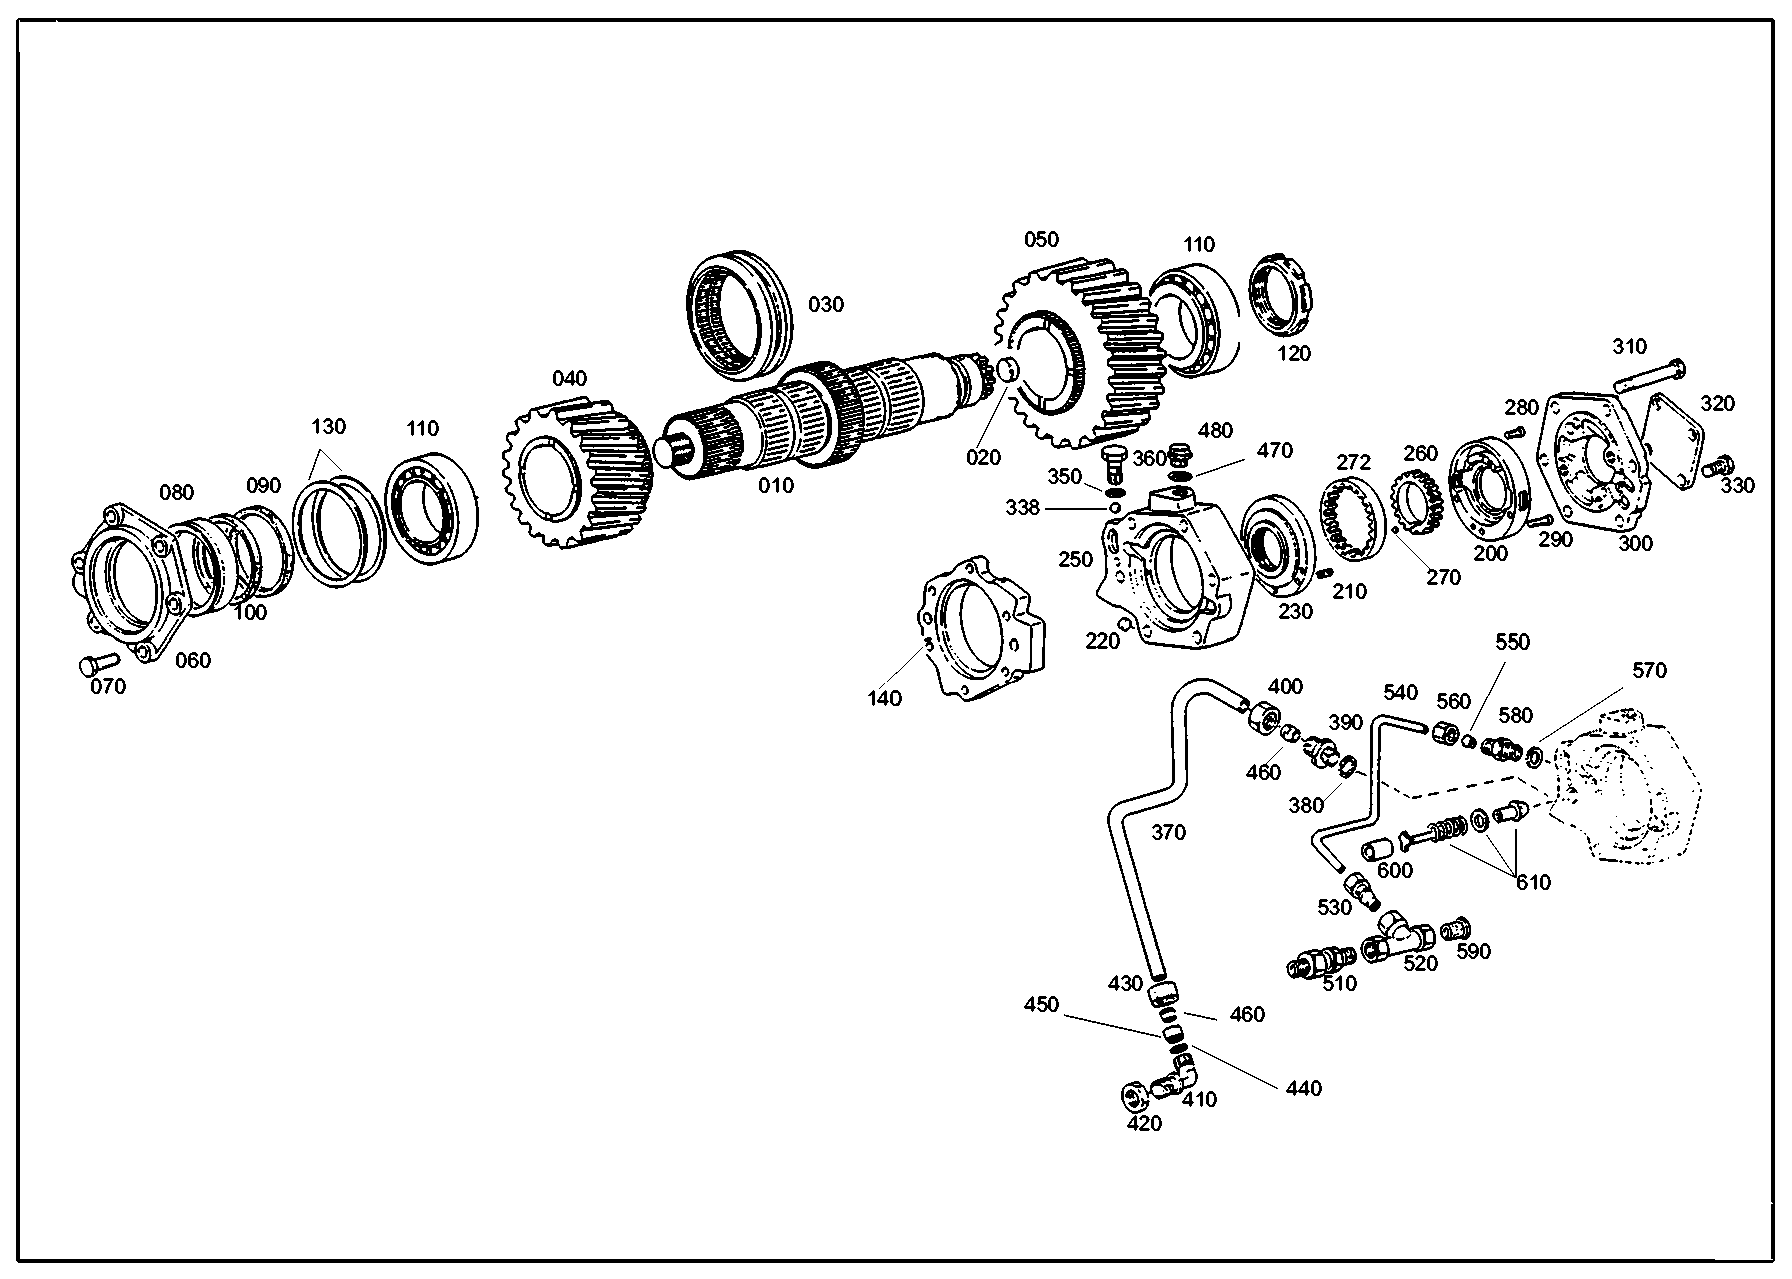 drawing for TITAN GMBH 172000210026 - FORMED TUBE (figure 4)